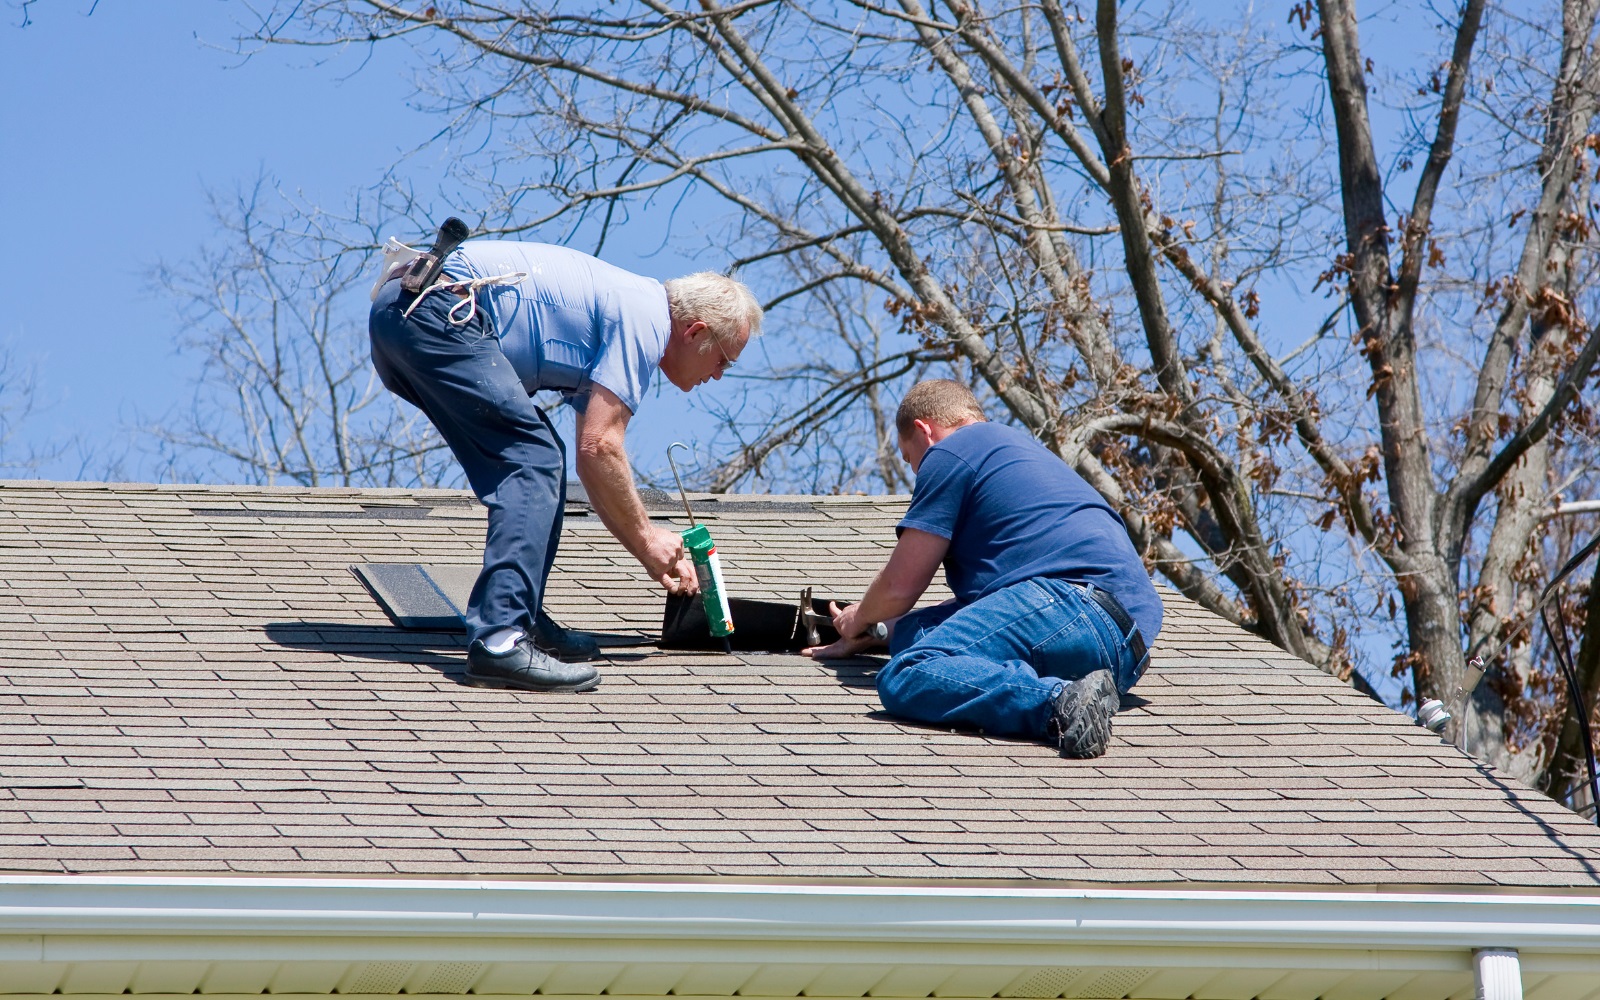 Ideas for a Roofing Biz